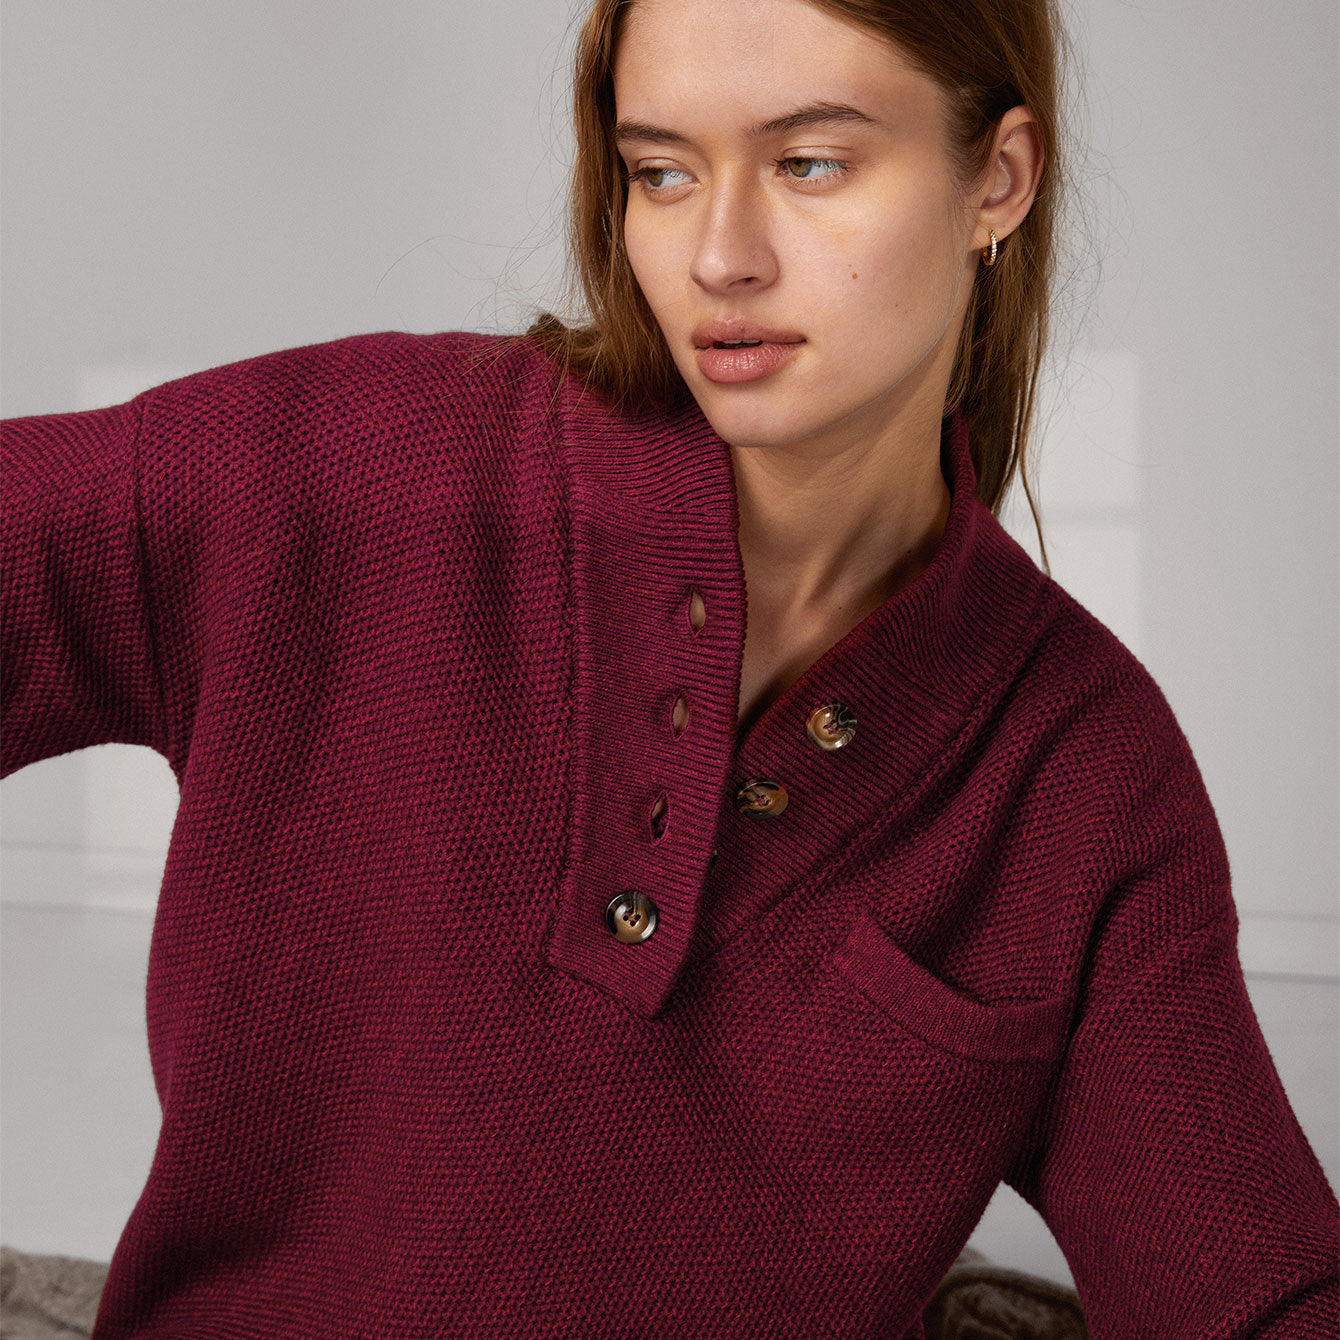 The Lunya Cotton Silk HenleySweater Is the Perfect WFH Top